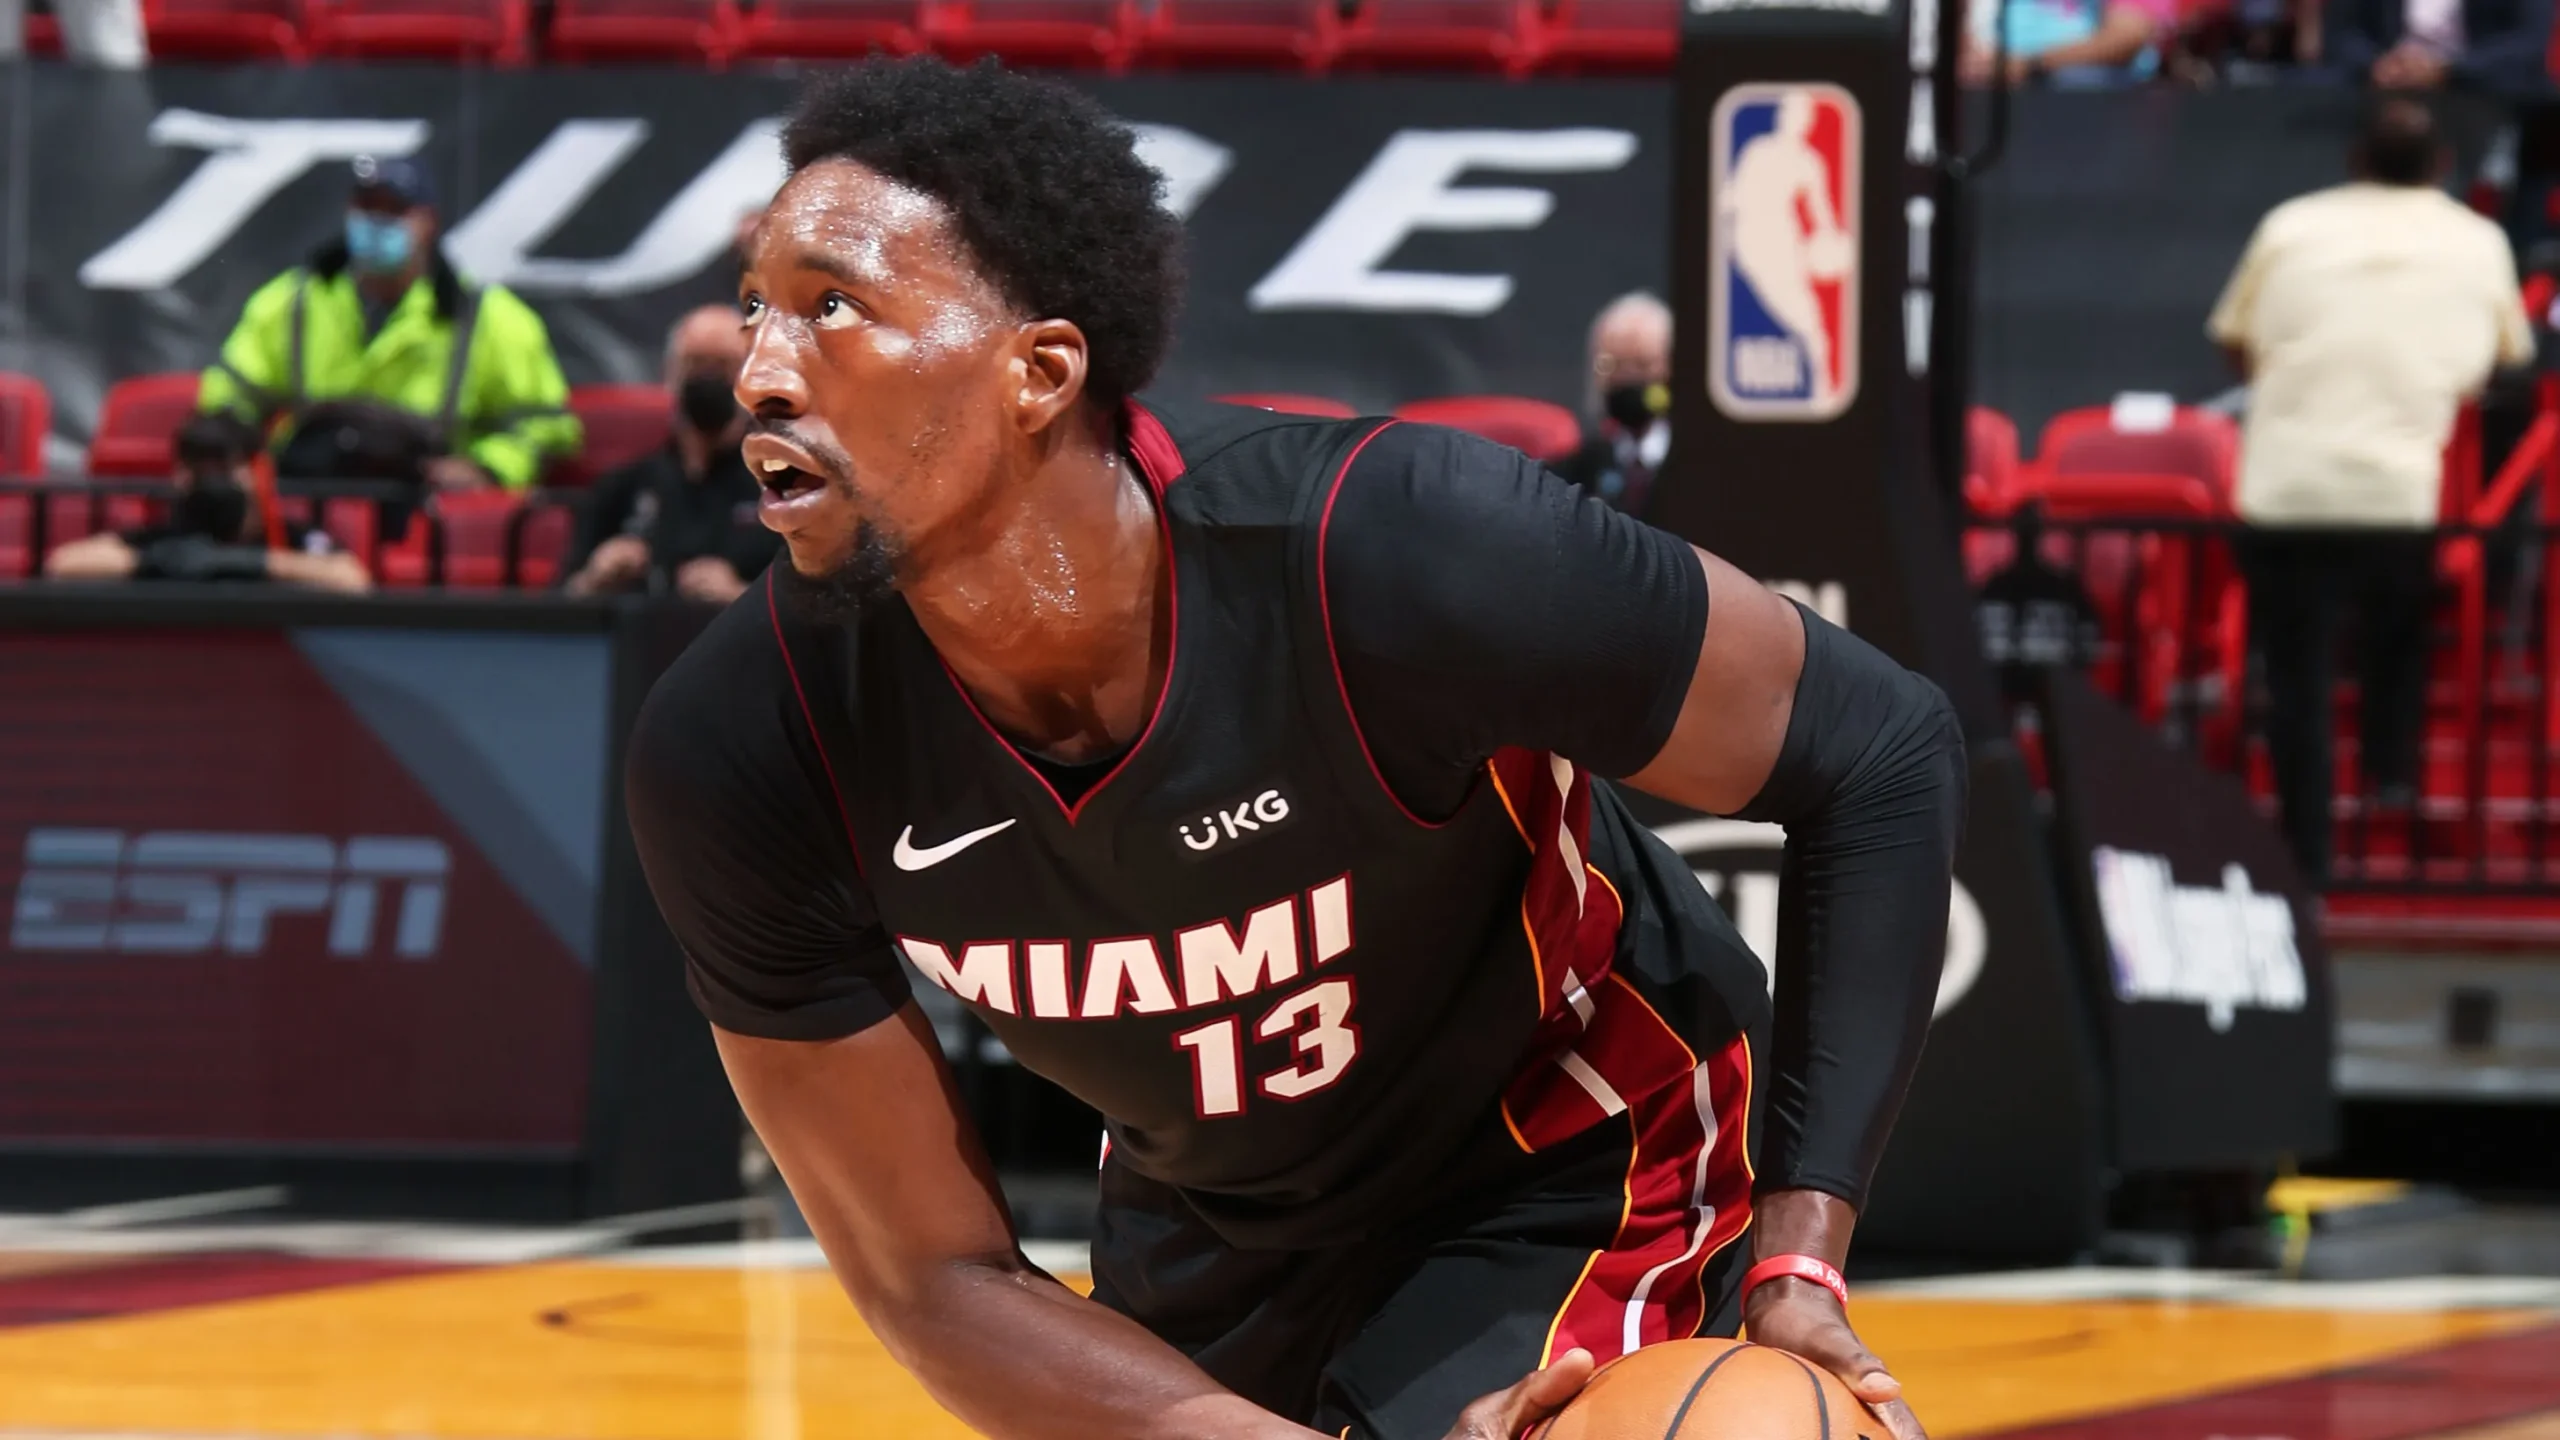 Bam Adebayo: The Unstoppable Force Behind Miami Heat's Defensive Mastery